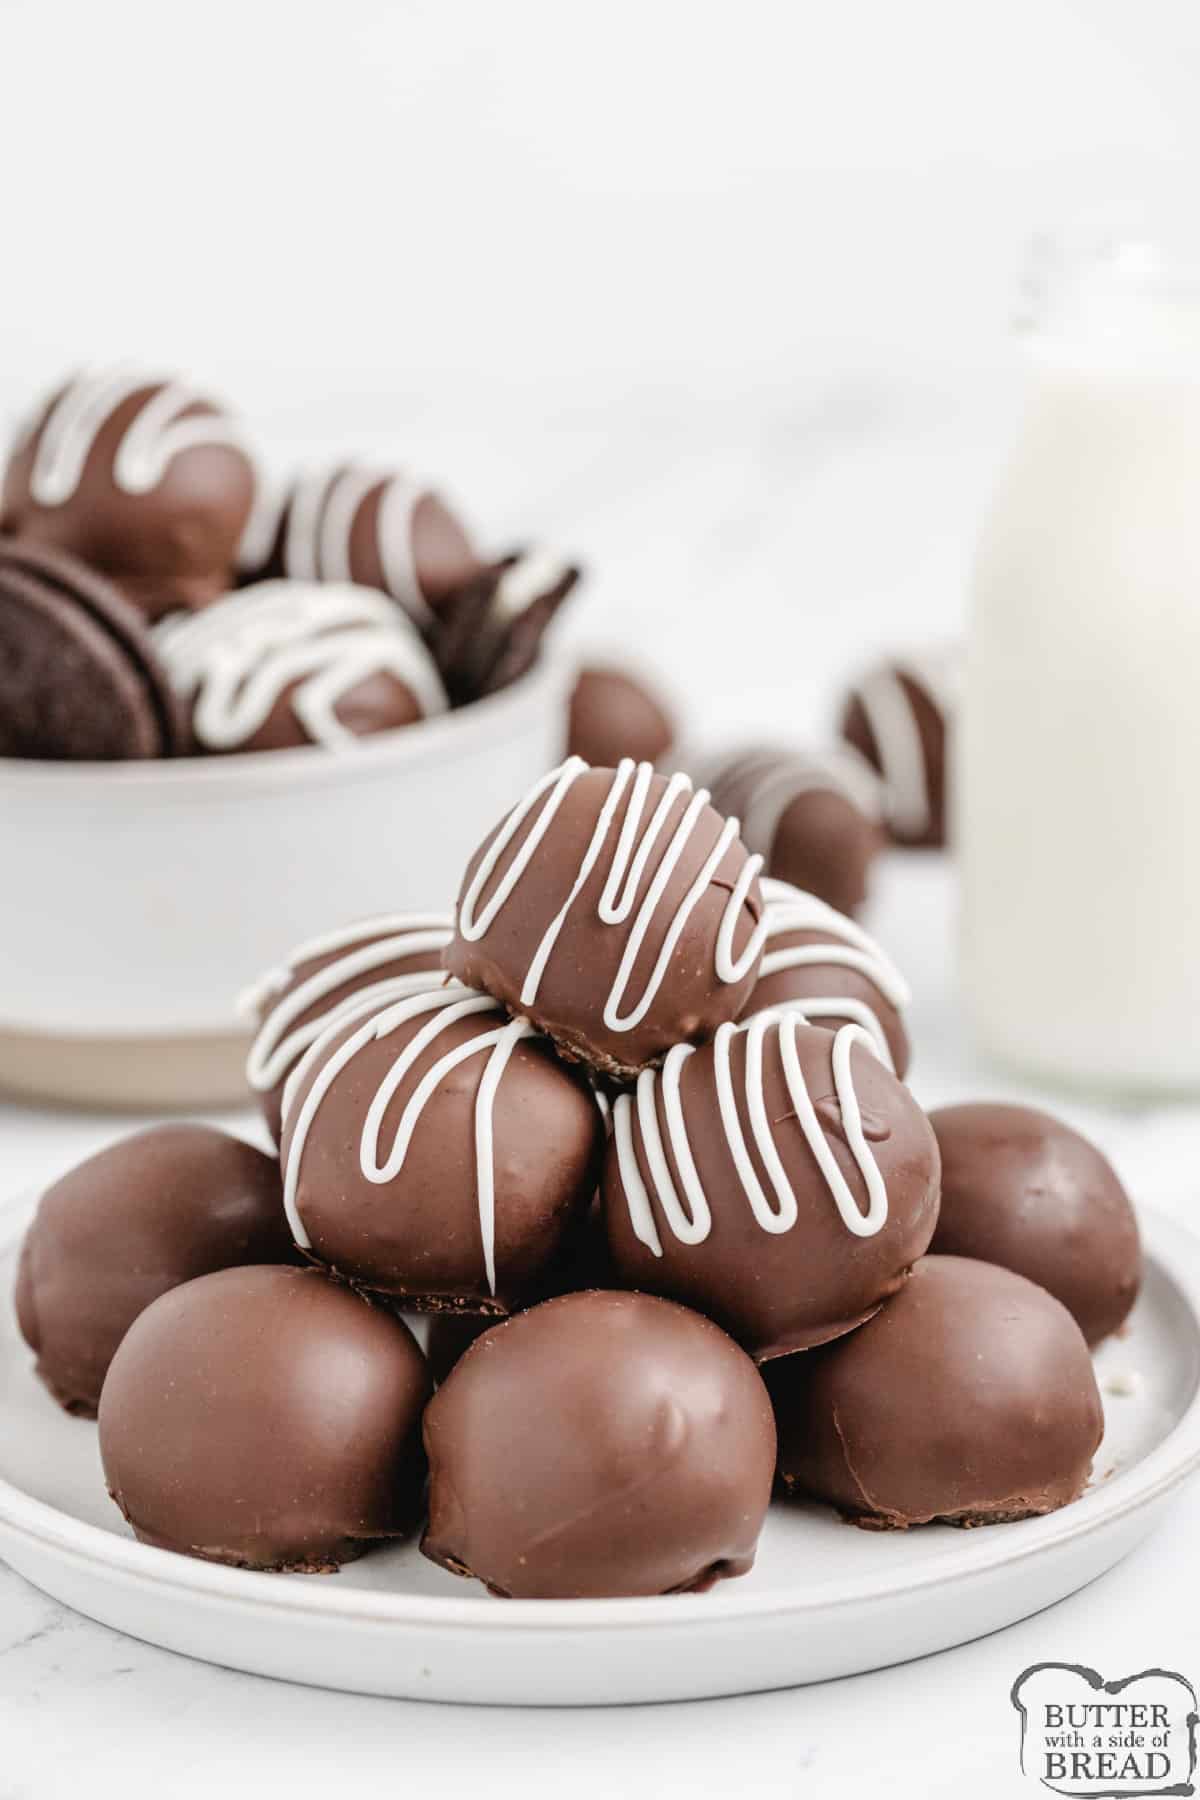 Peanut butter oreo balls dipped in chocolate